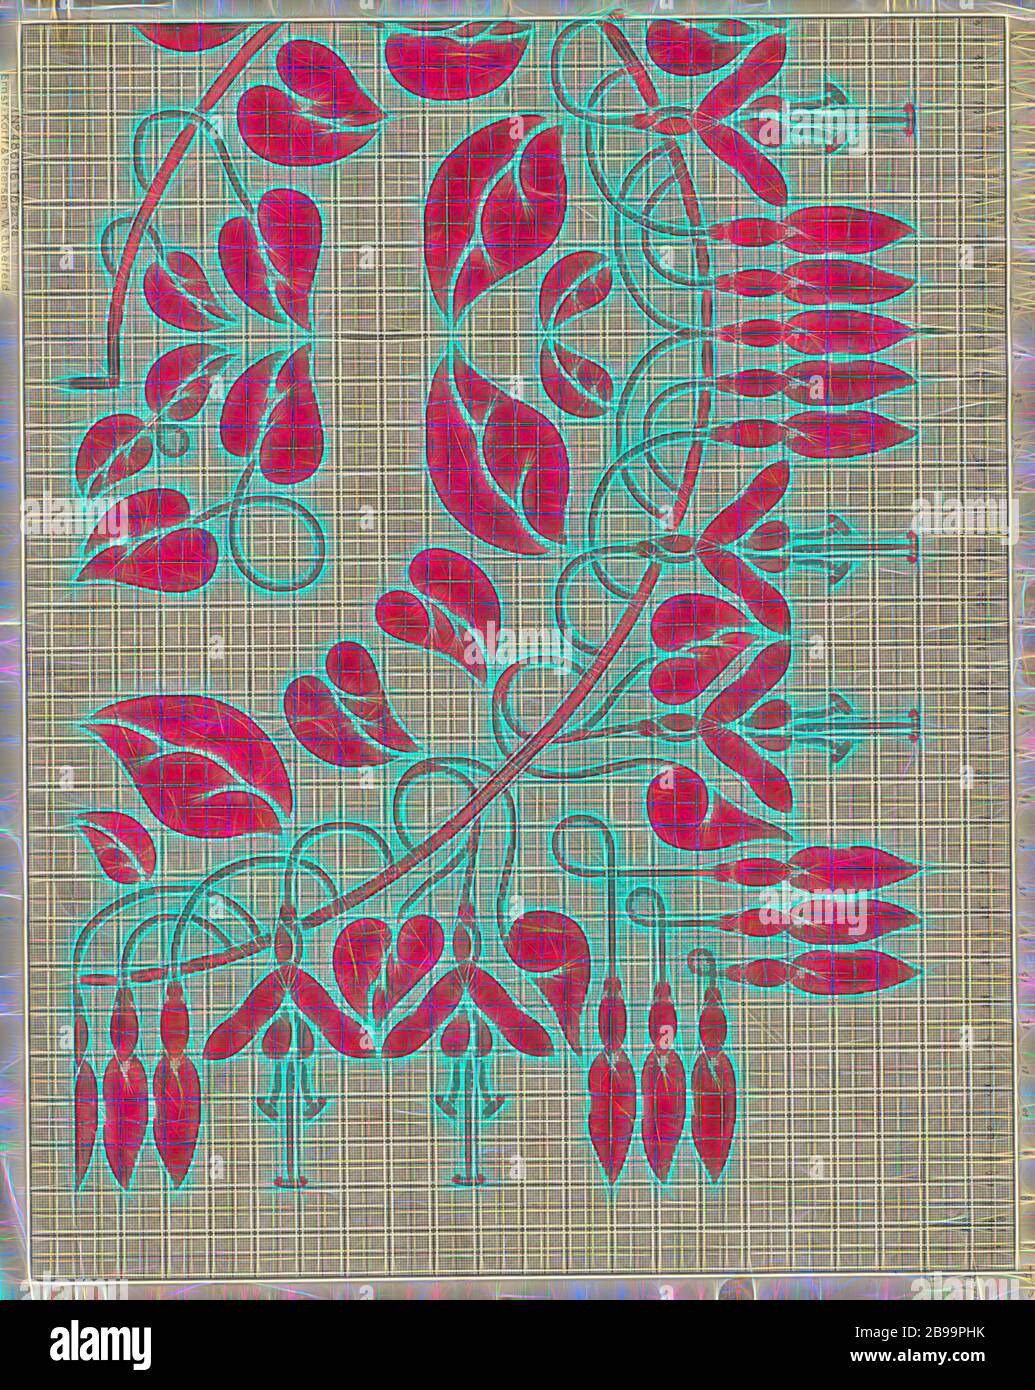 Emulatie naast Makkelijk in de omgang Pattern drawing for a damask tablecloth with design 'Fuchsia' and monogram  RIL (Royal Interocean Lines), Pattern drawing in red ink for a damask  tablecloth, in 4 parts, A up to D. The